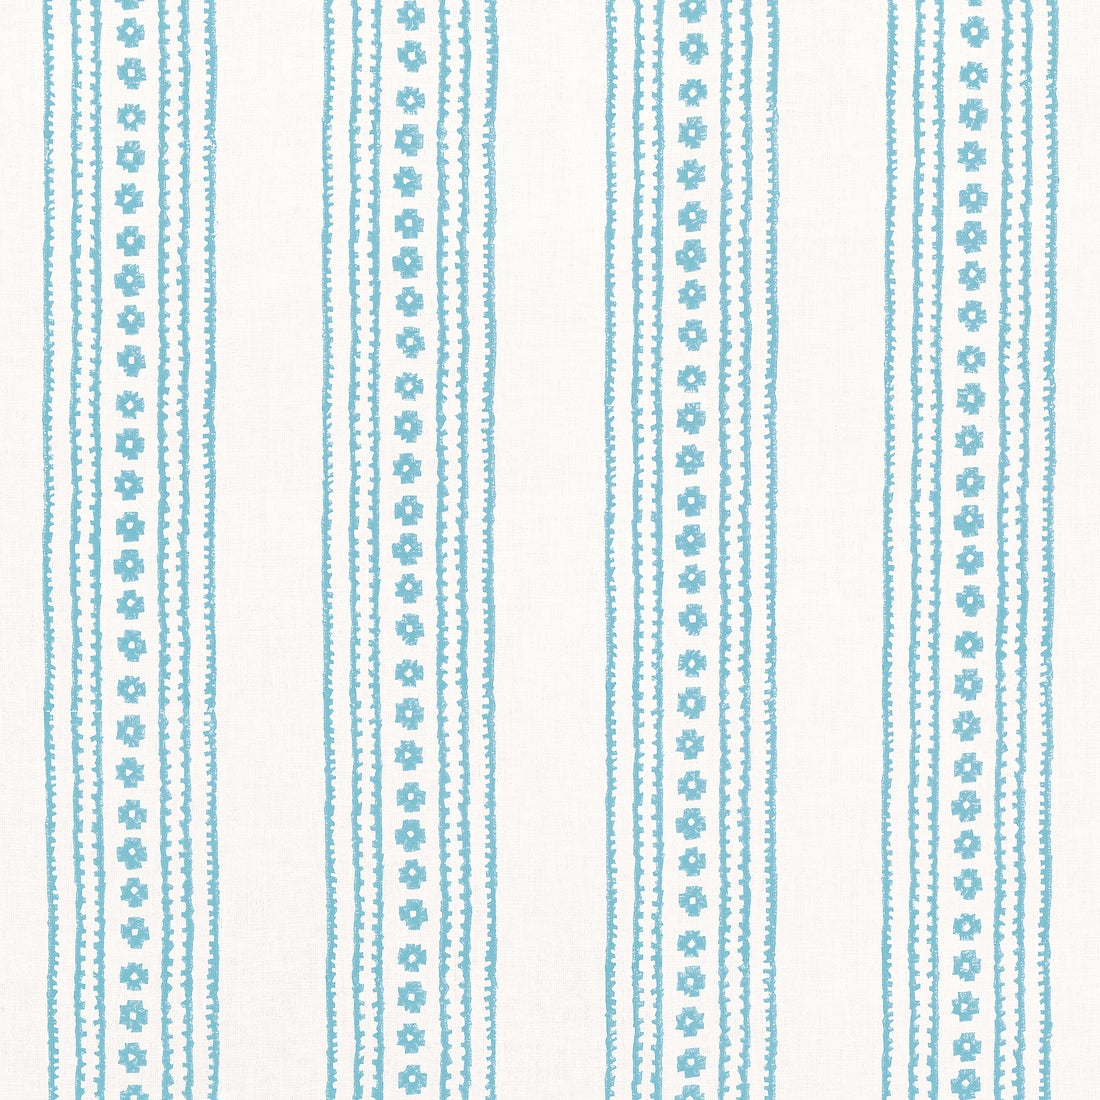 New Haven Stripe fabric in turquoise color - pattern number F910609 - by Thibaut in the Ceylon collection